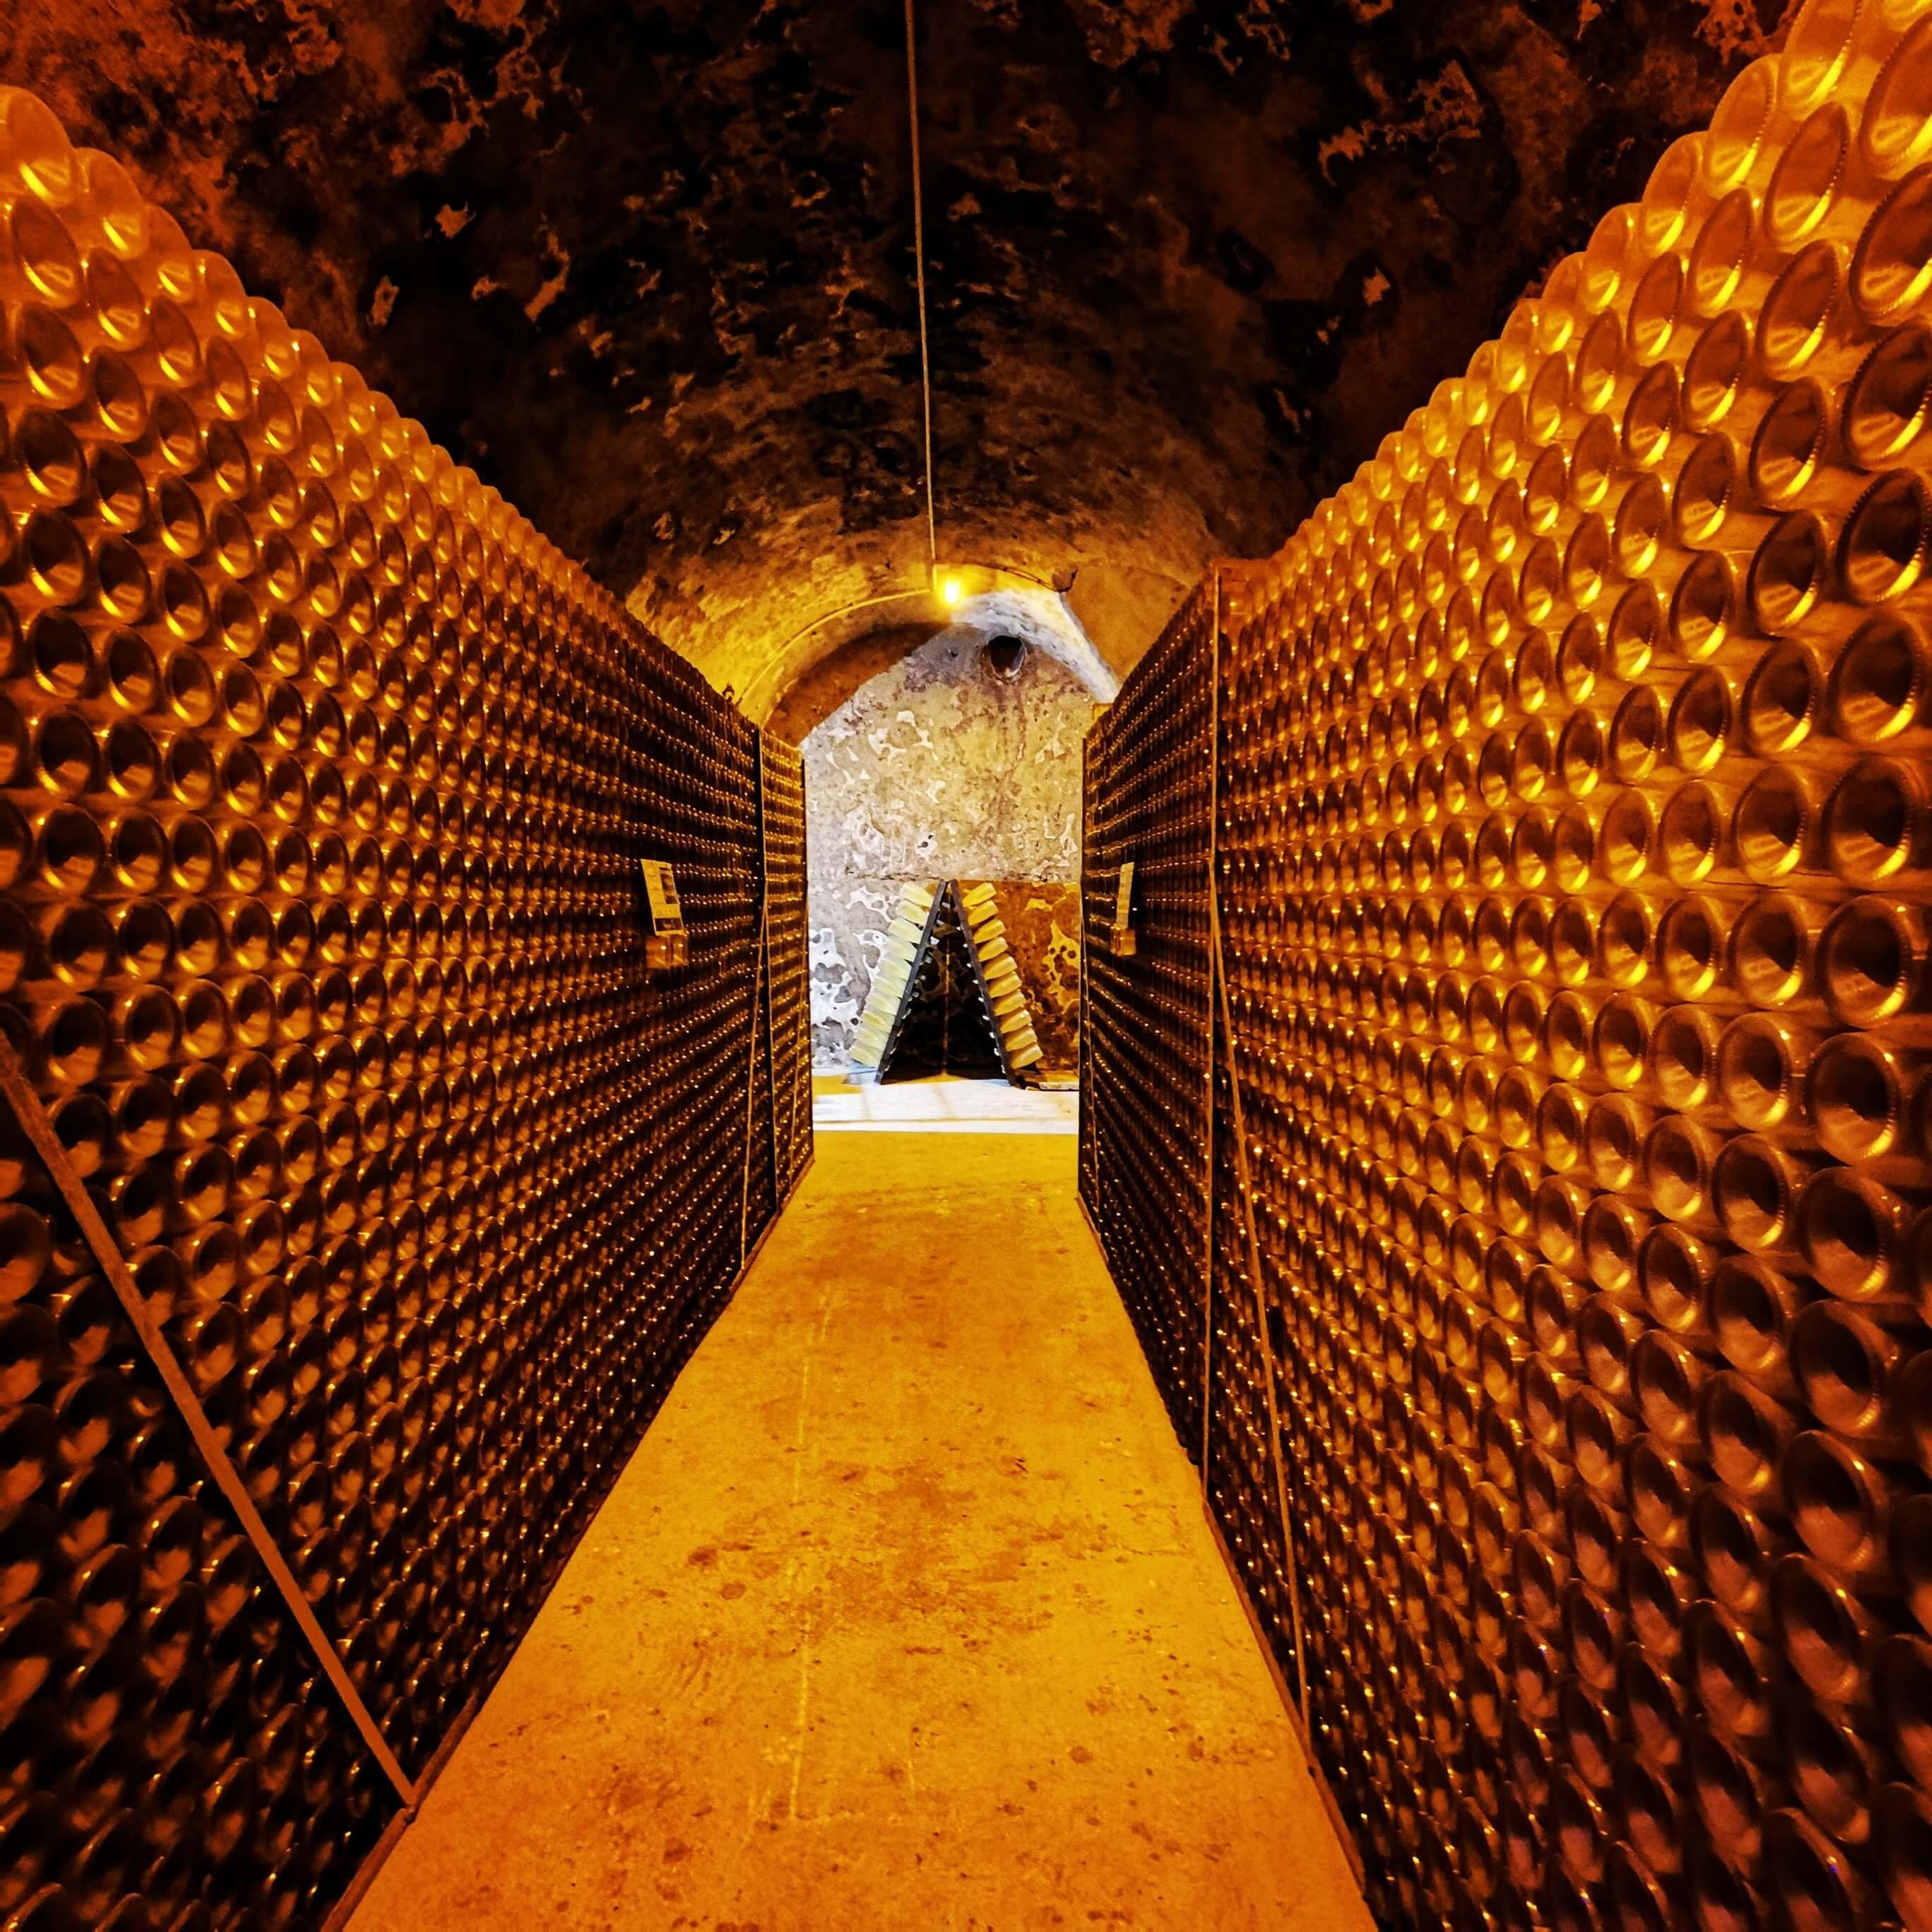 Visit the champagne cellars of Veuve Clicquot